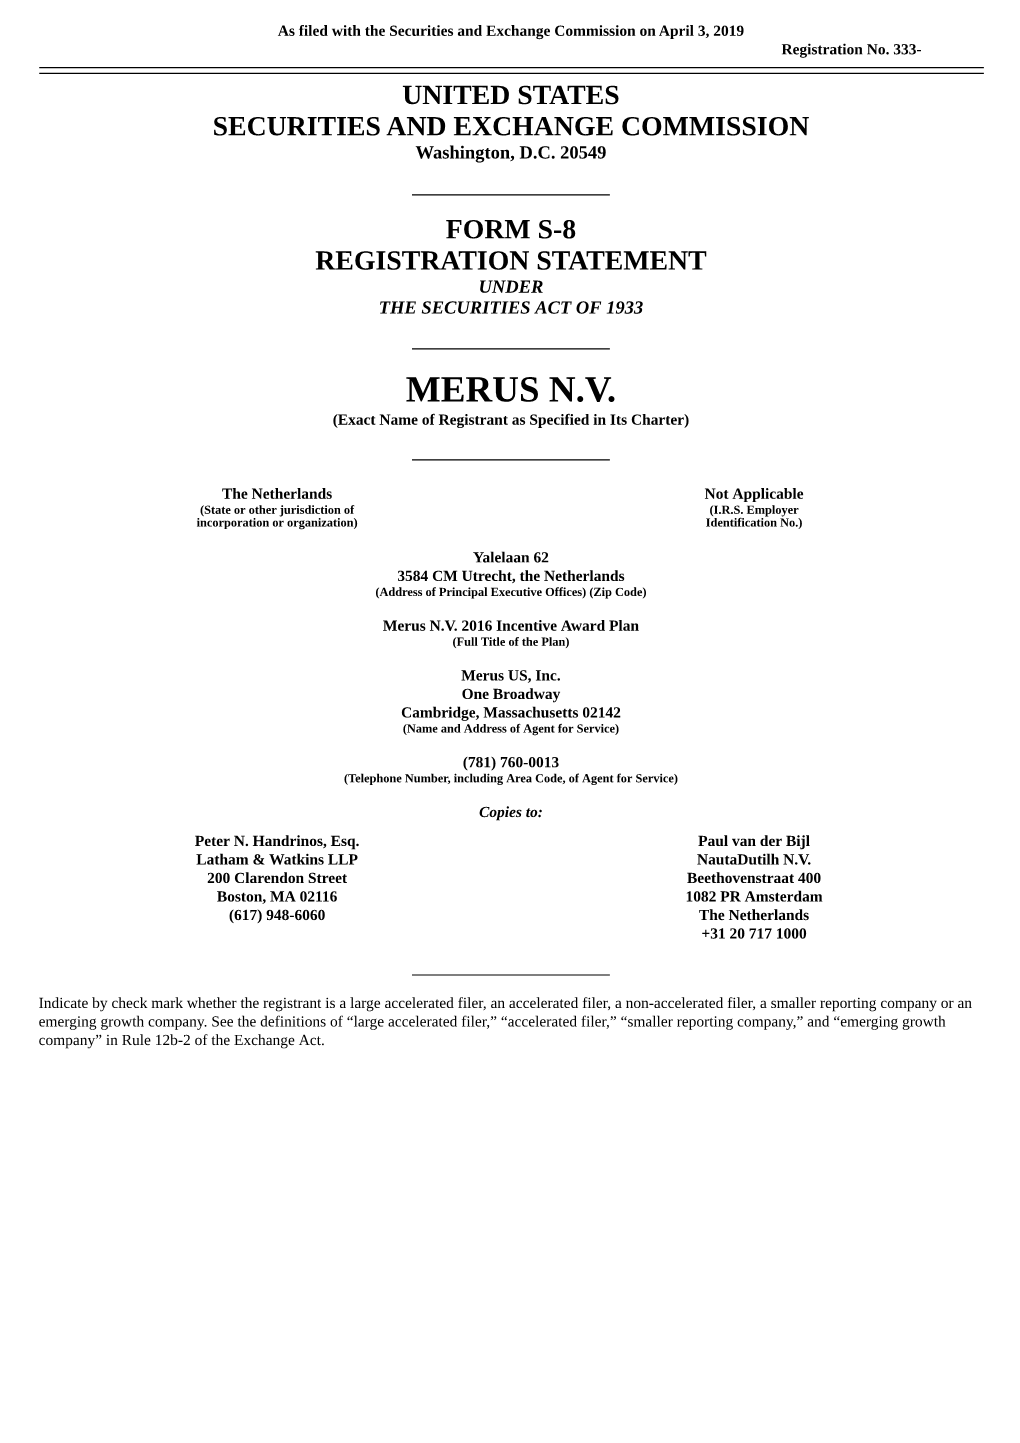 MERUS N.V. (Exact Name of Registrant As Specified in Its Charter)